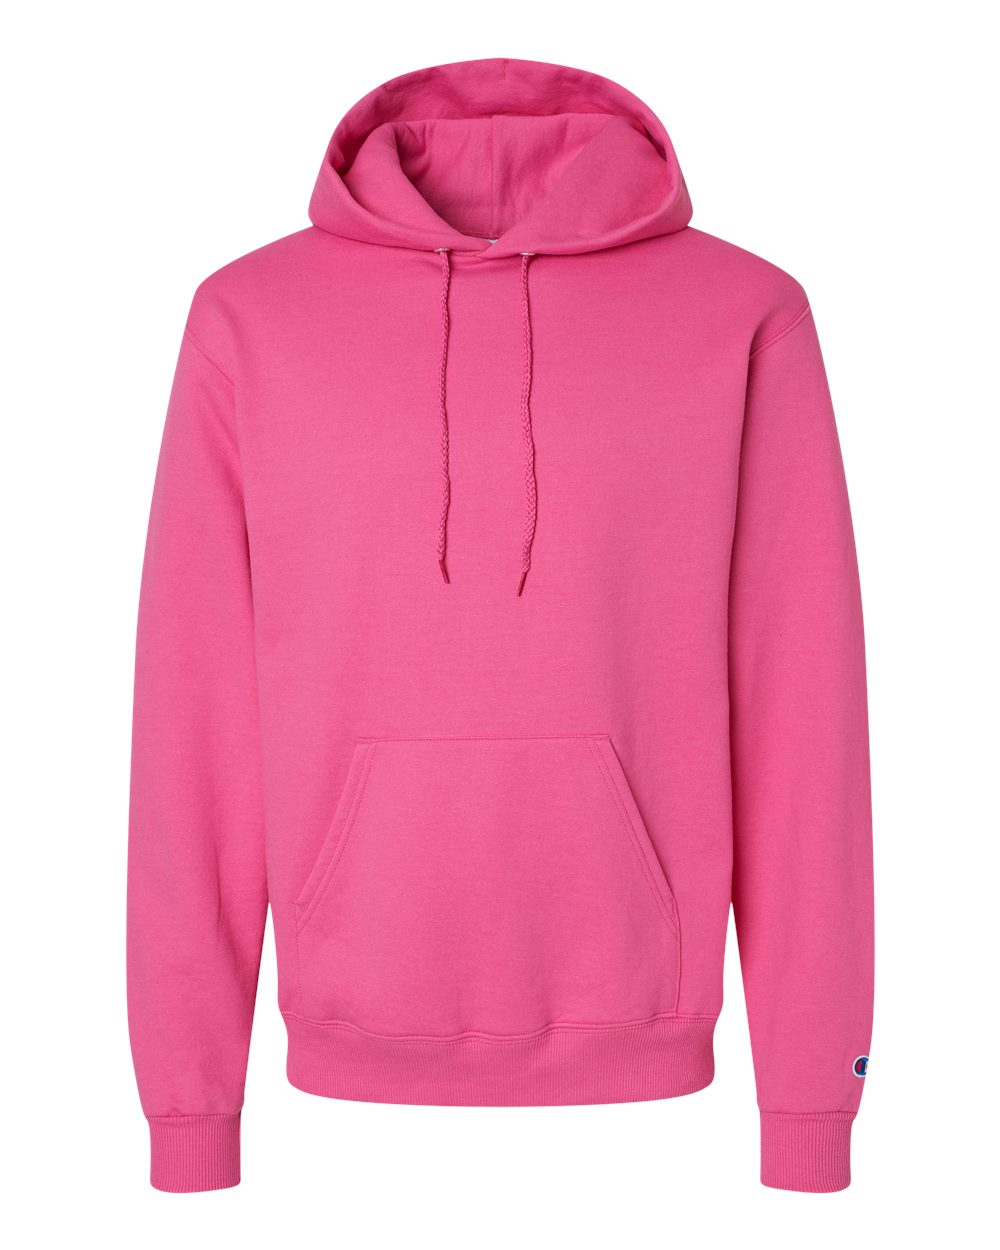 Champion Hoodie S700 in Wow Pink